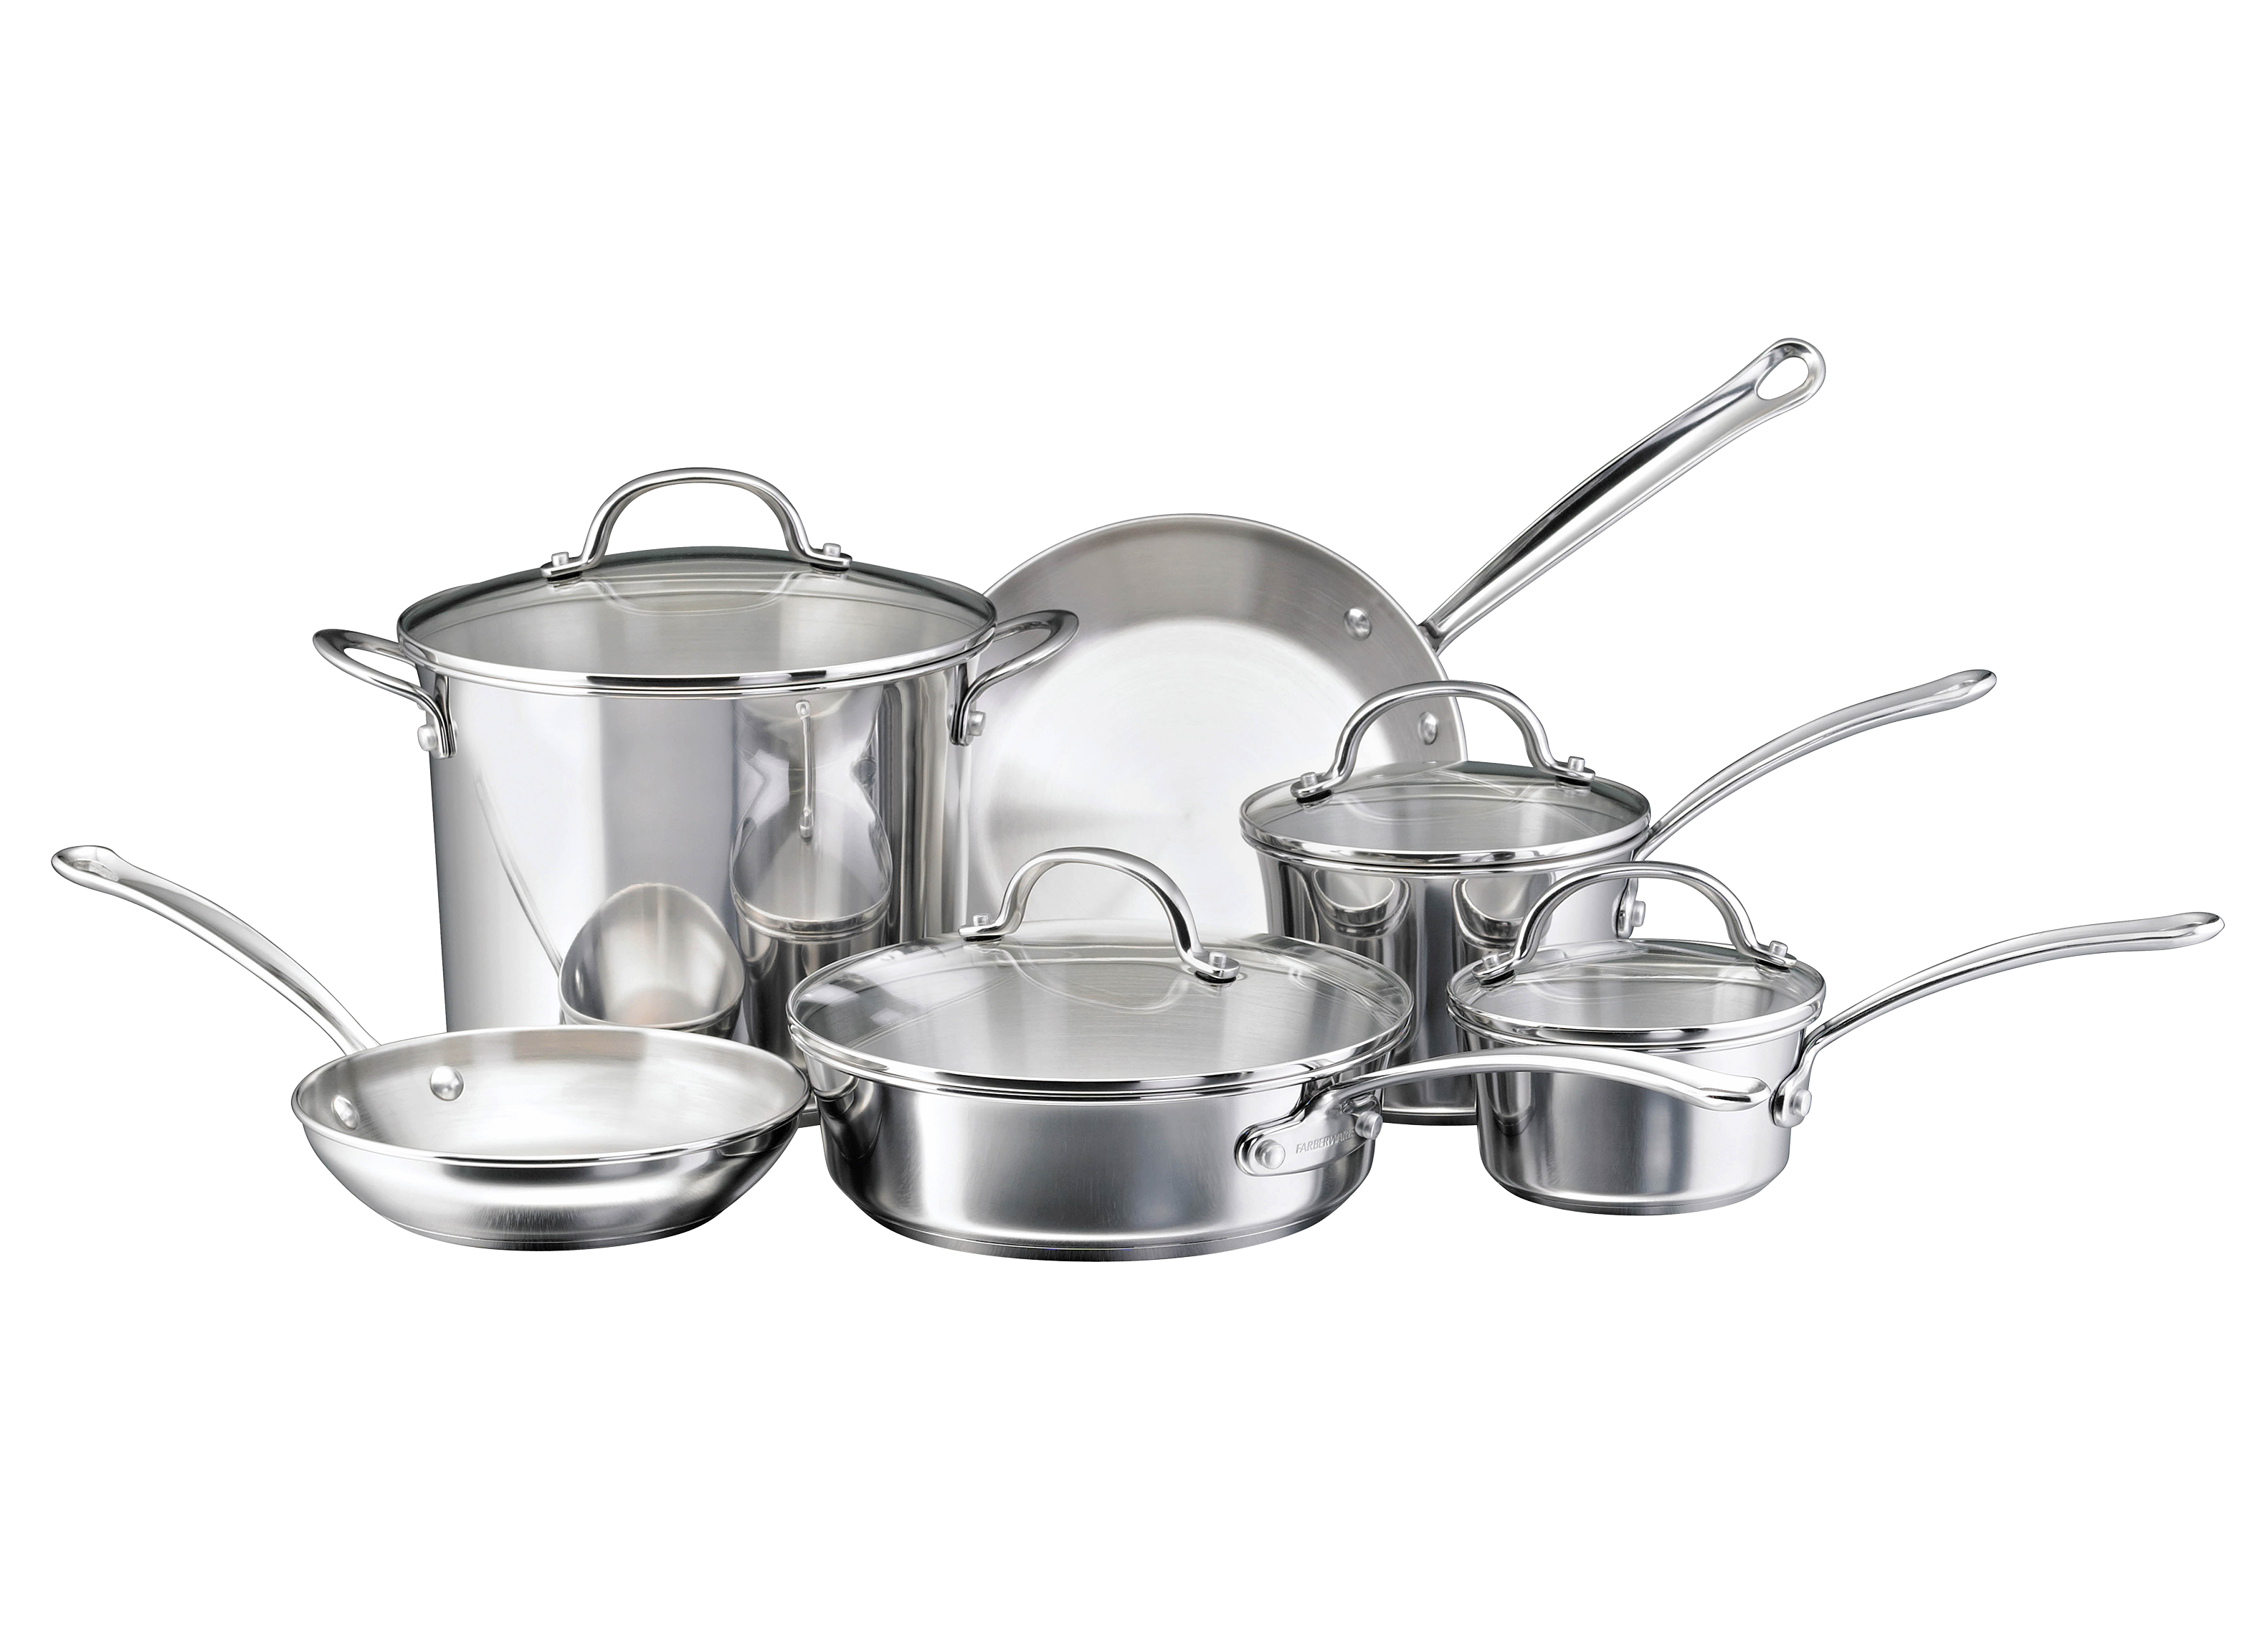 https://crdms.images.consumerreports.org/prod/products/cr/models/404671-cookware-sets-stainless-steel-farberware-millennium-10pc-10023238.png